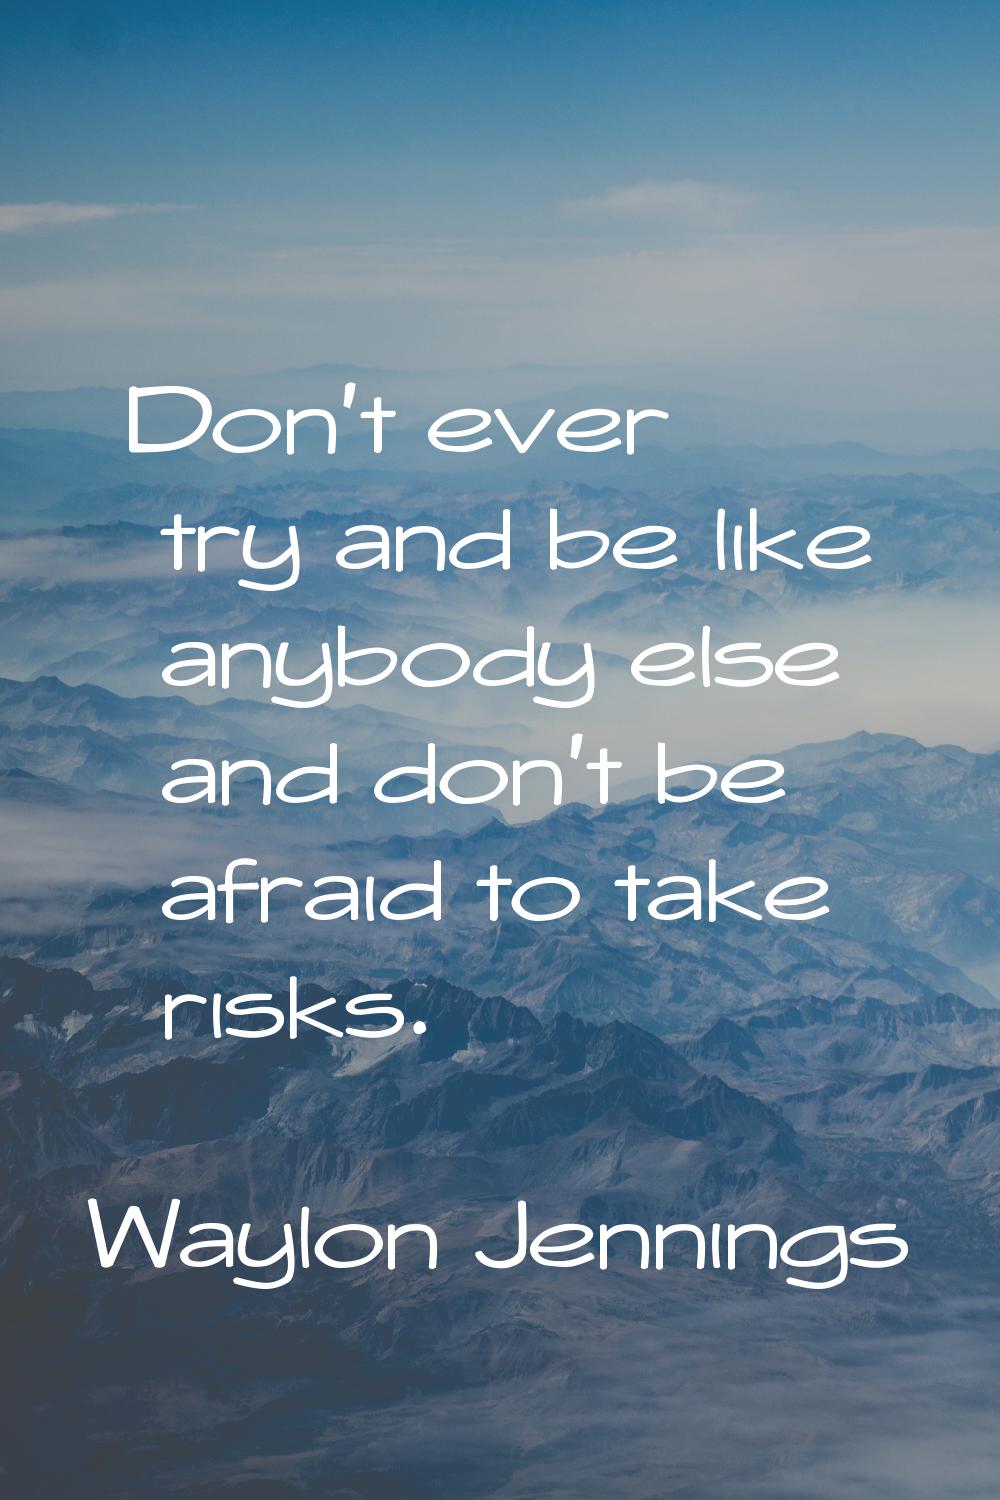 Don't ever try and be like anybody else and don't be afraid to take risks.